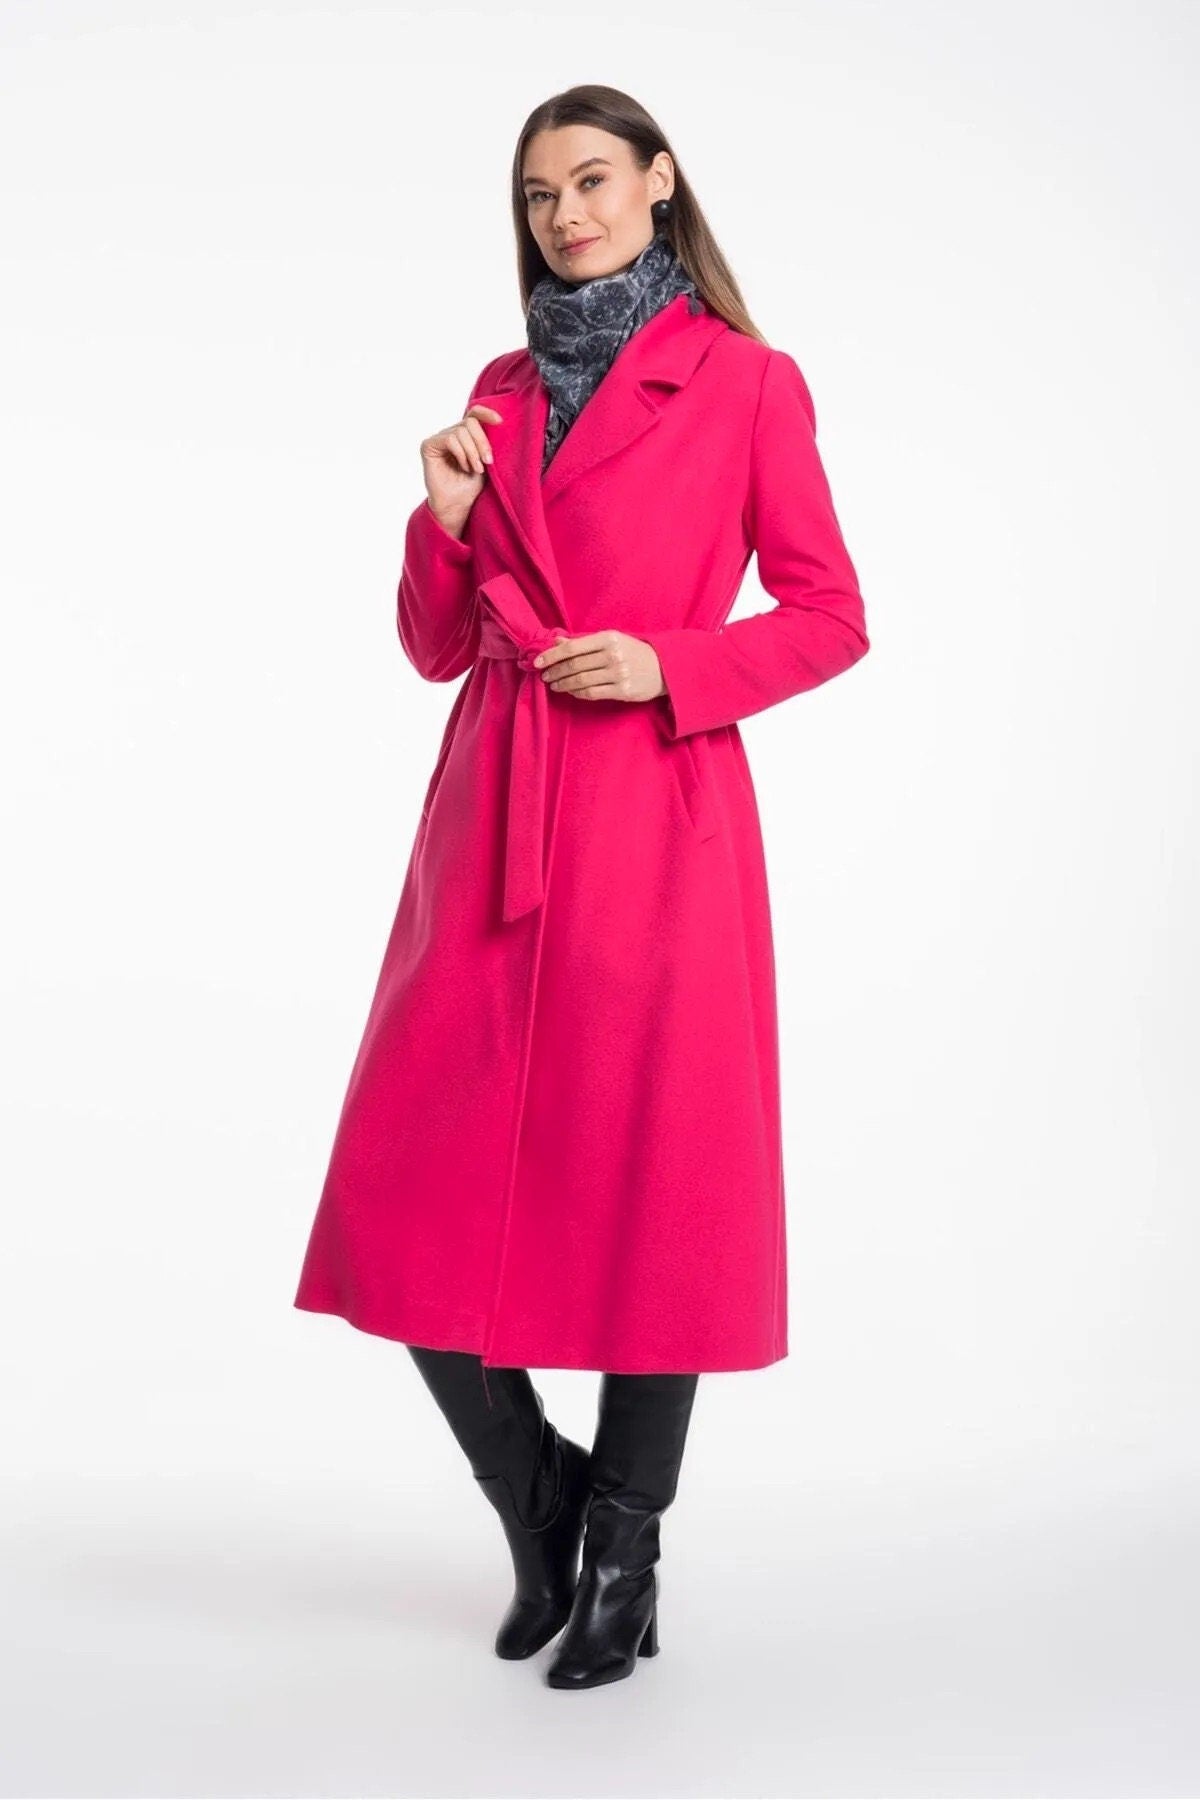 Camel Wool Long Coat with Belt and Pocket